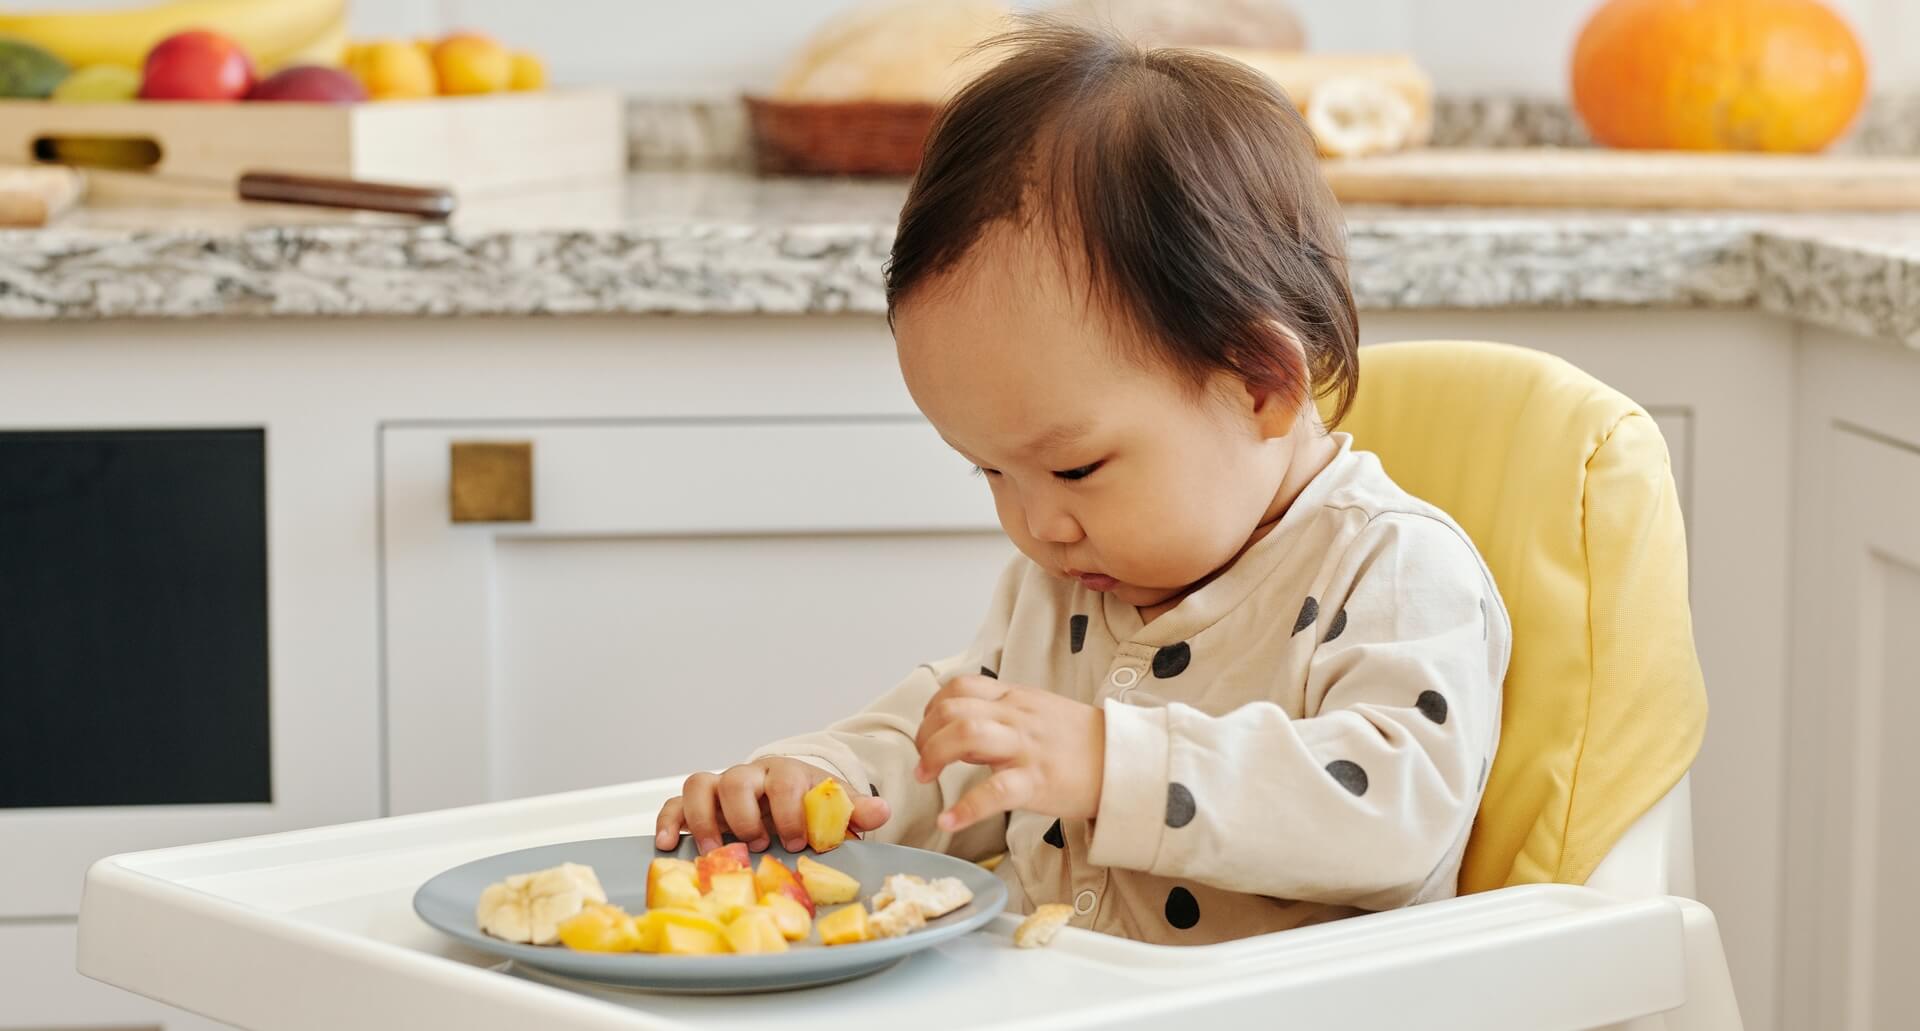 Healthy Eating Habits in Toddlers